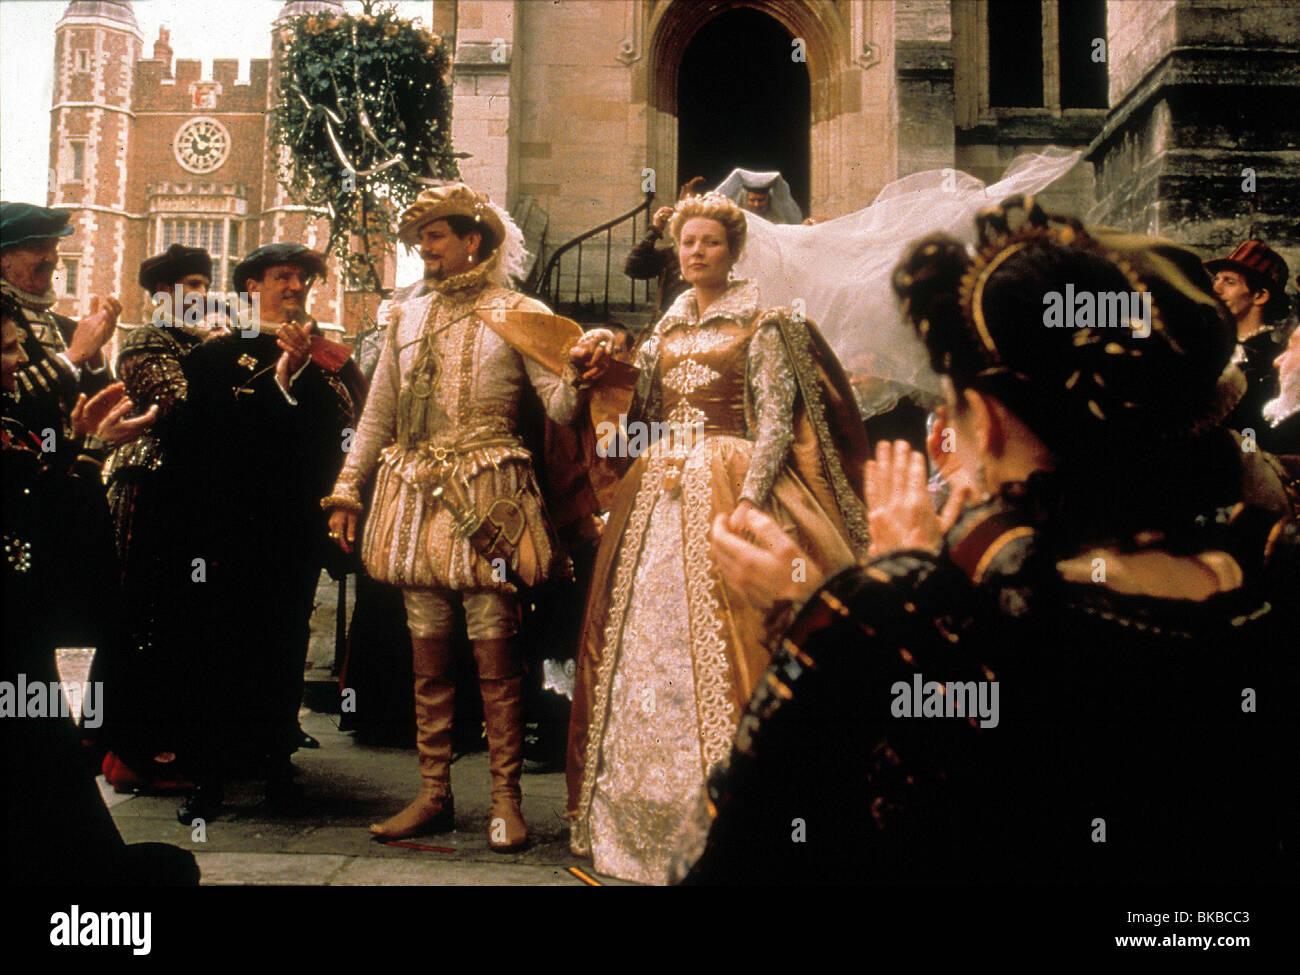 SHAKESPEARE IN LOVE (1999) Colin Firth, Gwyneth Paltrow SHIL 100 Banque D'Images